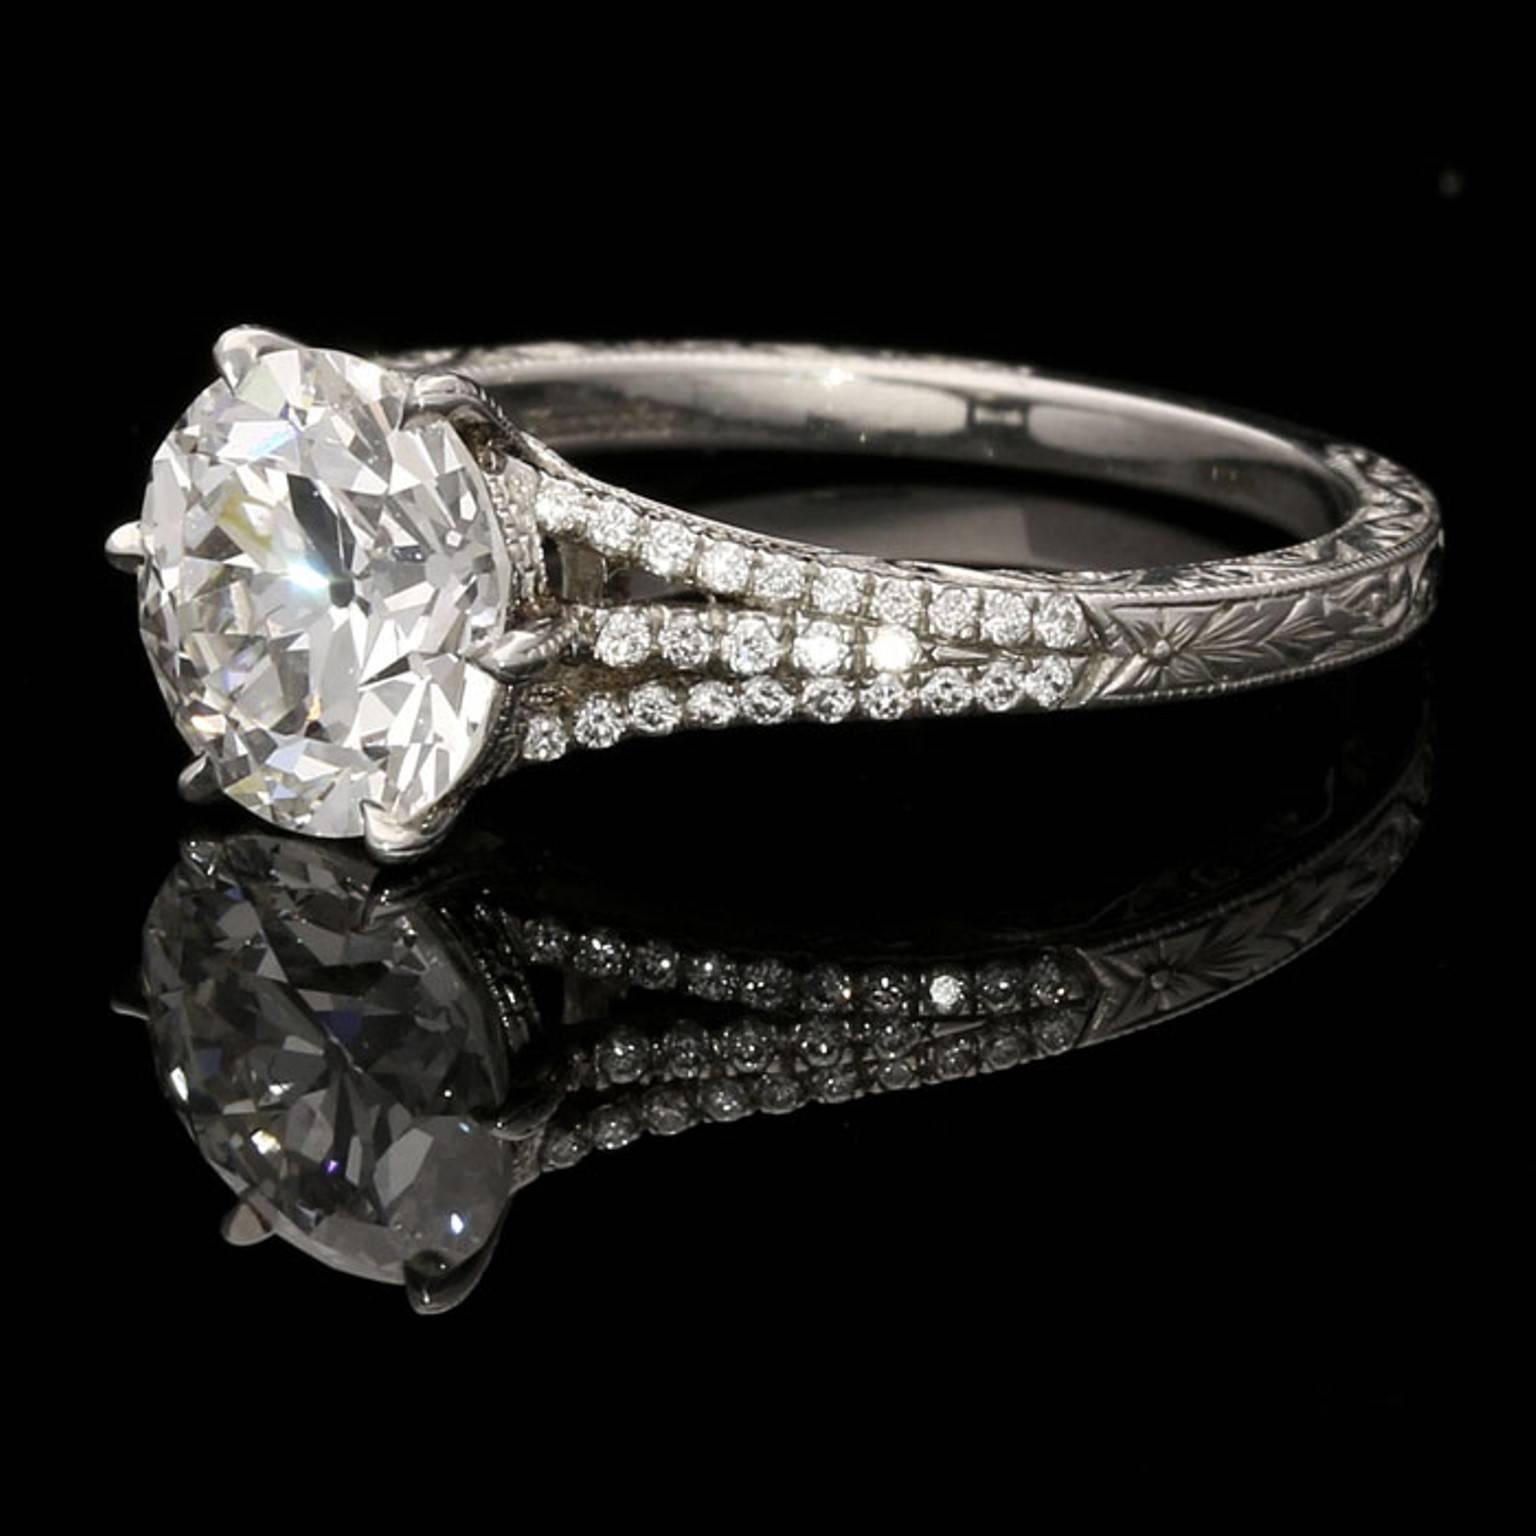 The ring set with a charming round old European cut diamond weighing 2.05ct and of G colour and VS2 clarity six claw set between unusual triple split diamond set shoulders to an ornately hand engraved finely crafted platinum mount.

2.05ct G VS2